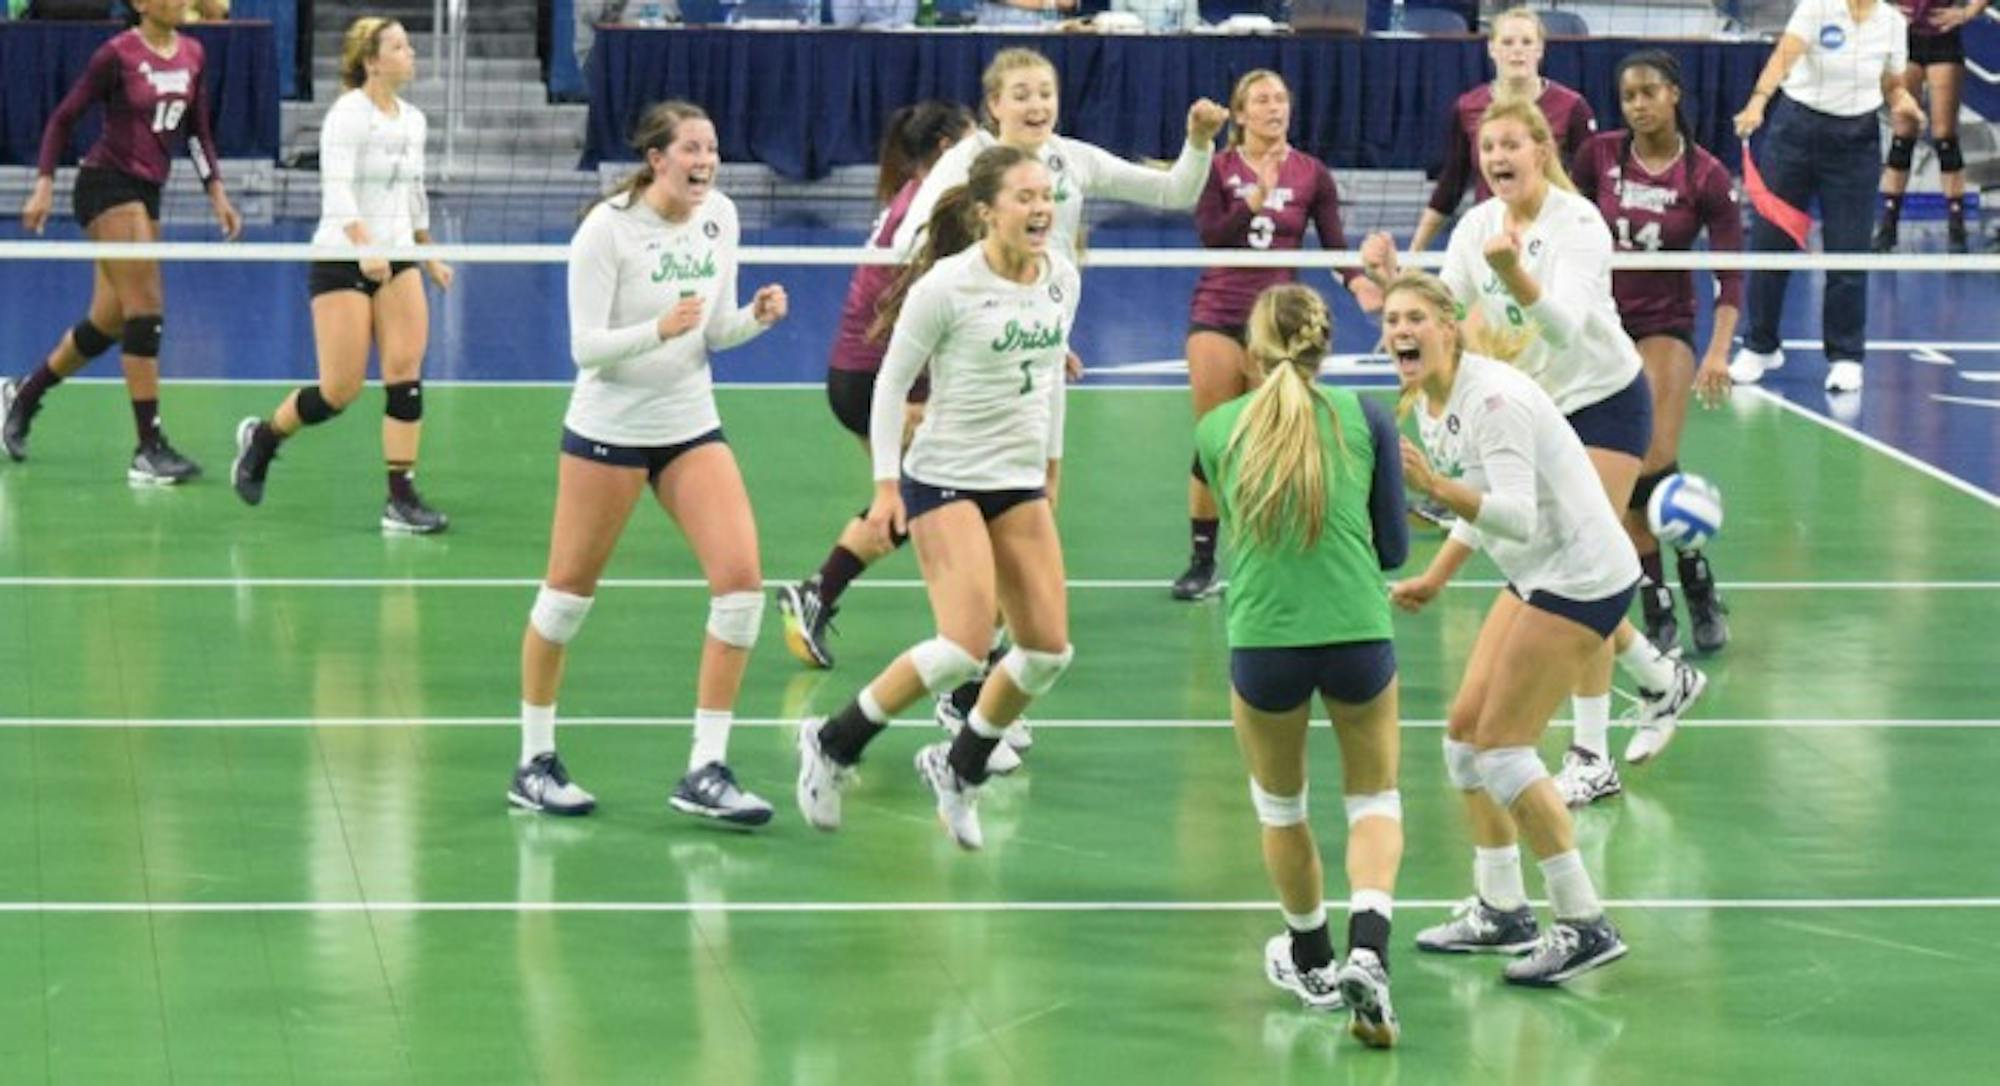 The Irish volleyball team celebrates a win against Mississippi State on Friday at Purcell Pavillion. The team won two of its three matches in the Golden Dome Invitational last weekend.